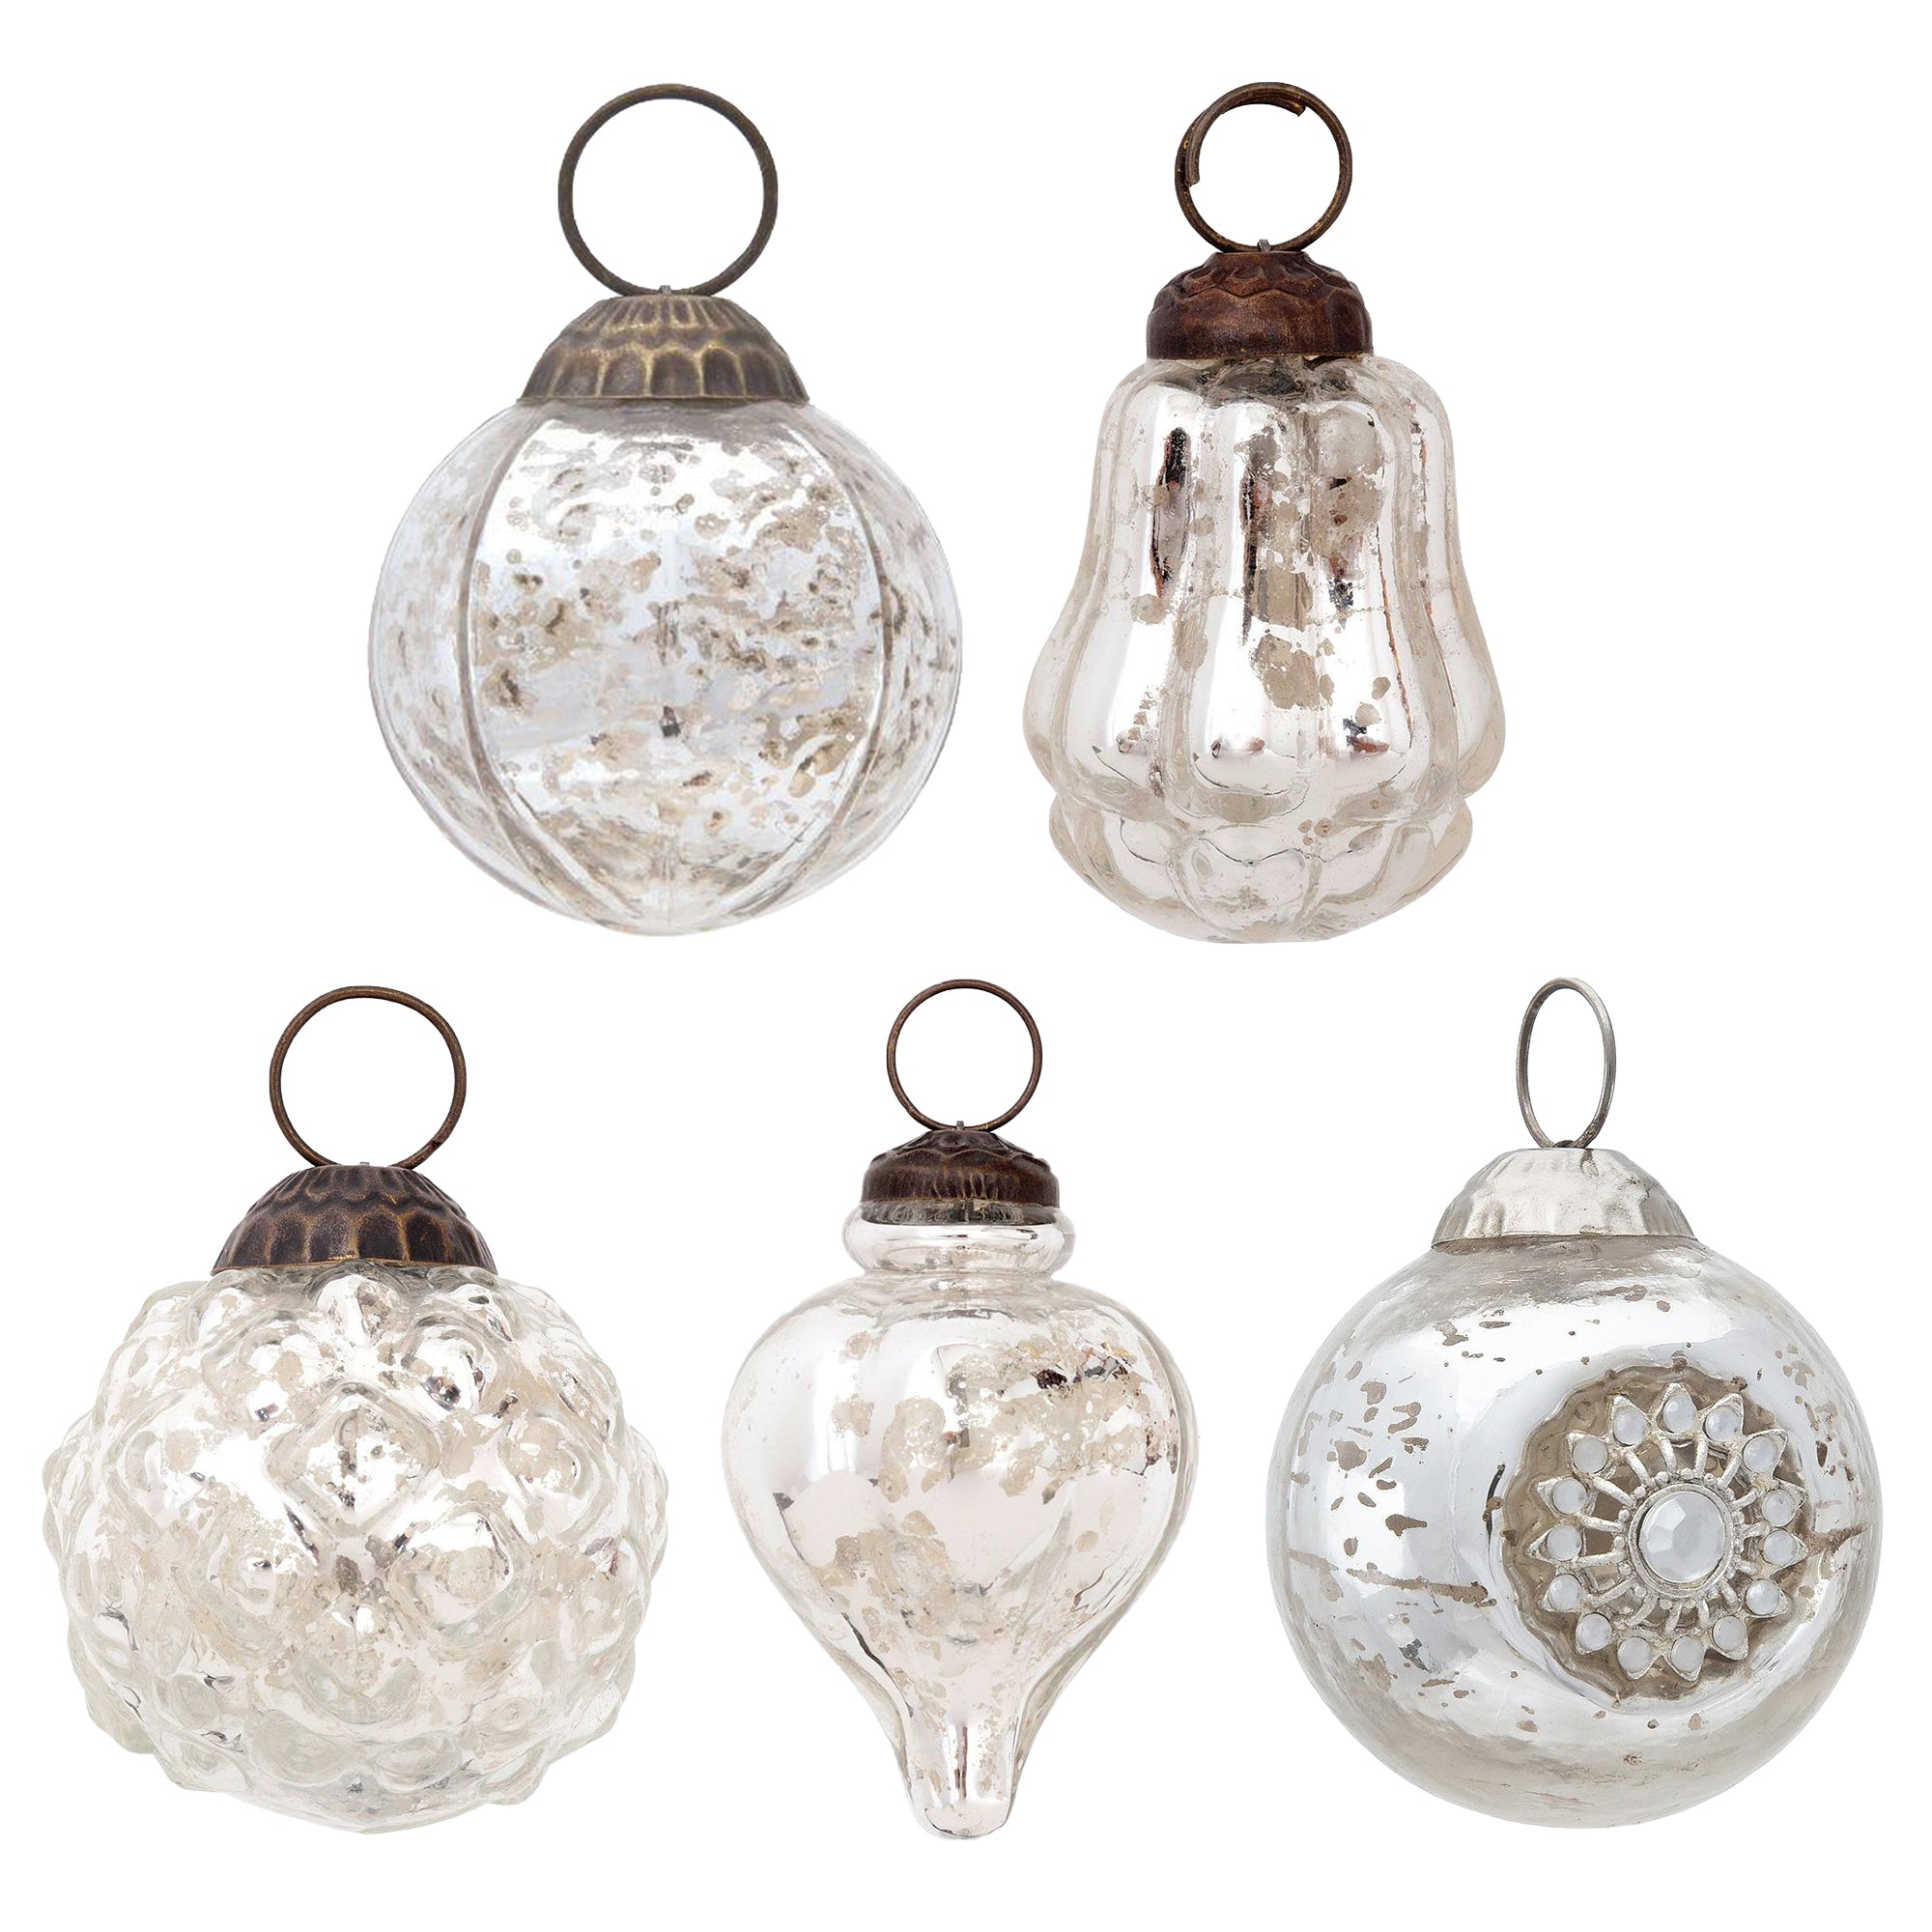 5 Pack | Silver Shabby Chic Assorted Ornaments Set - Great Gift Idea, Vintage-Style Decorations for Christmas, Special Occasions, Home Decor and Parties